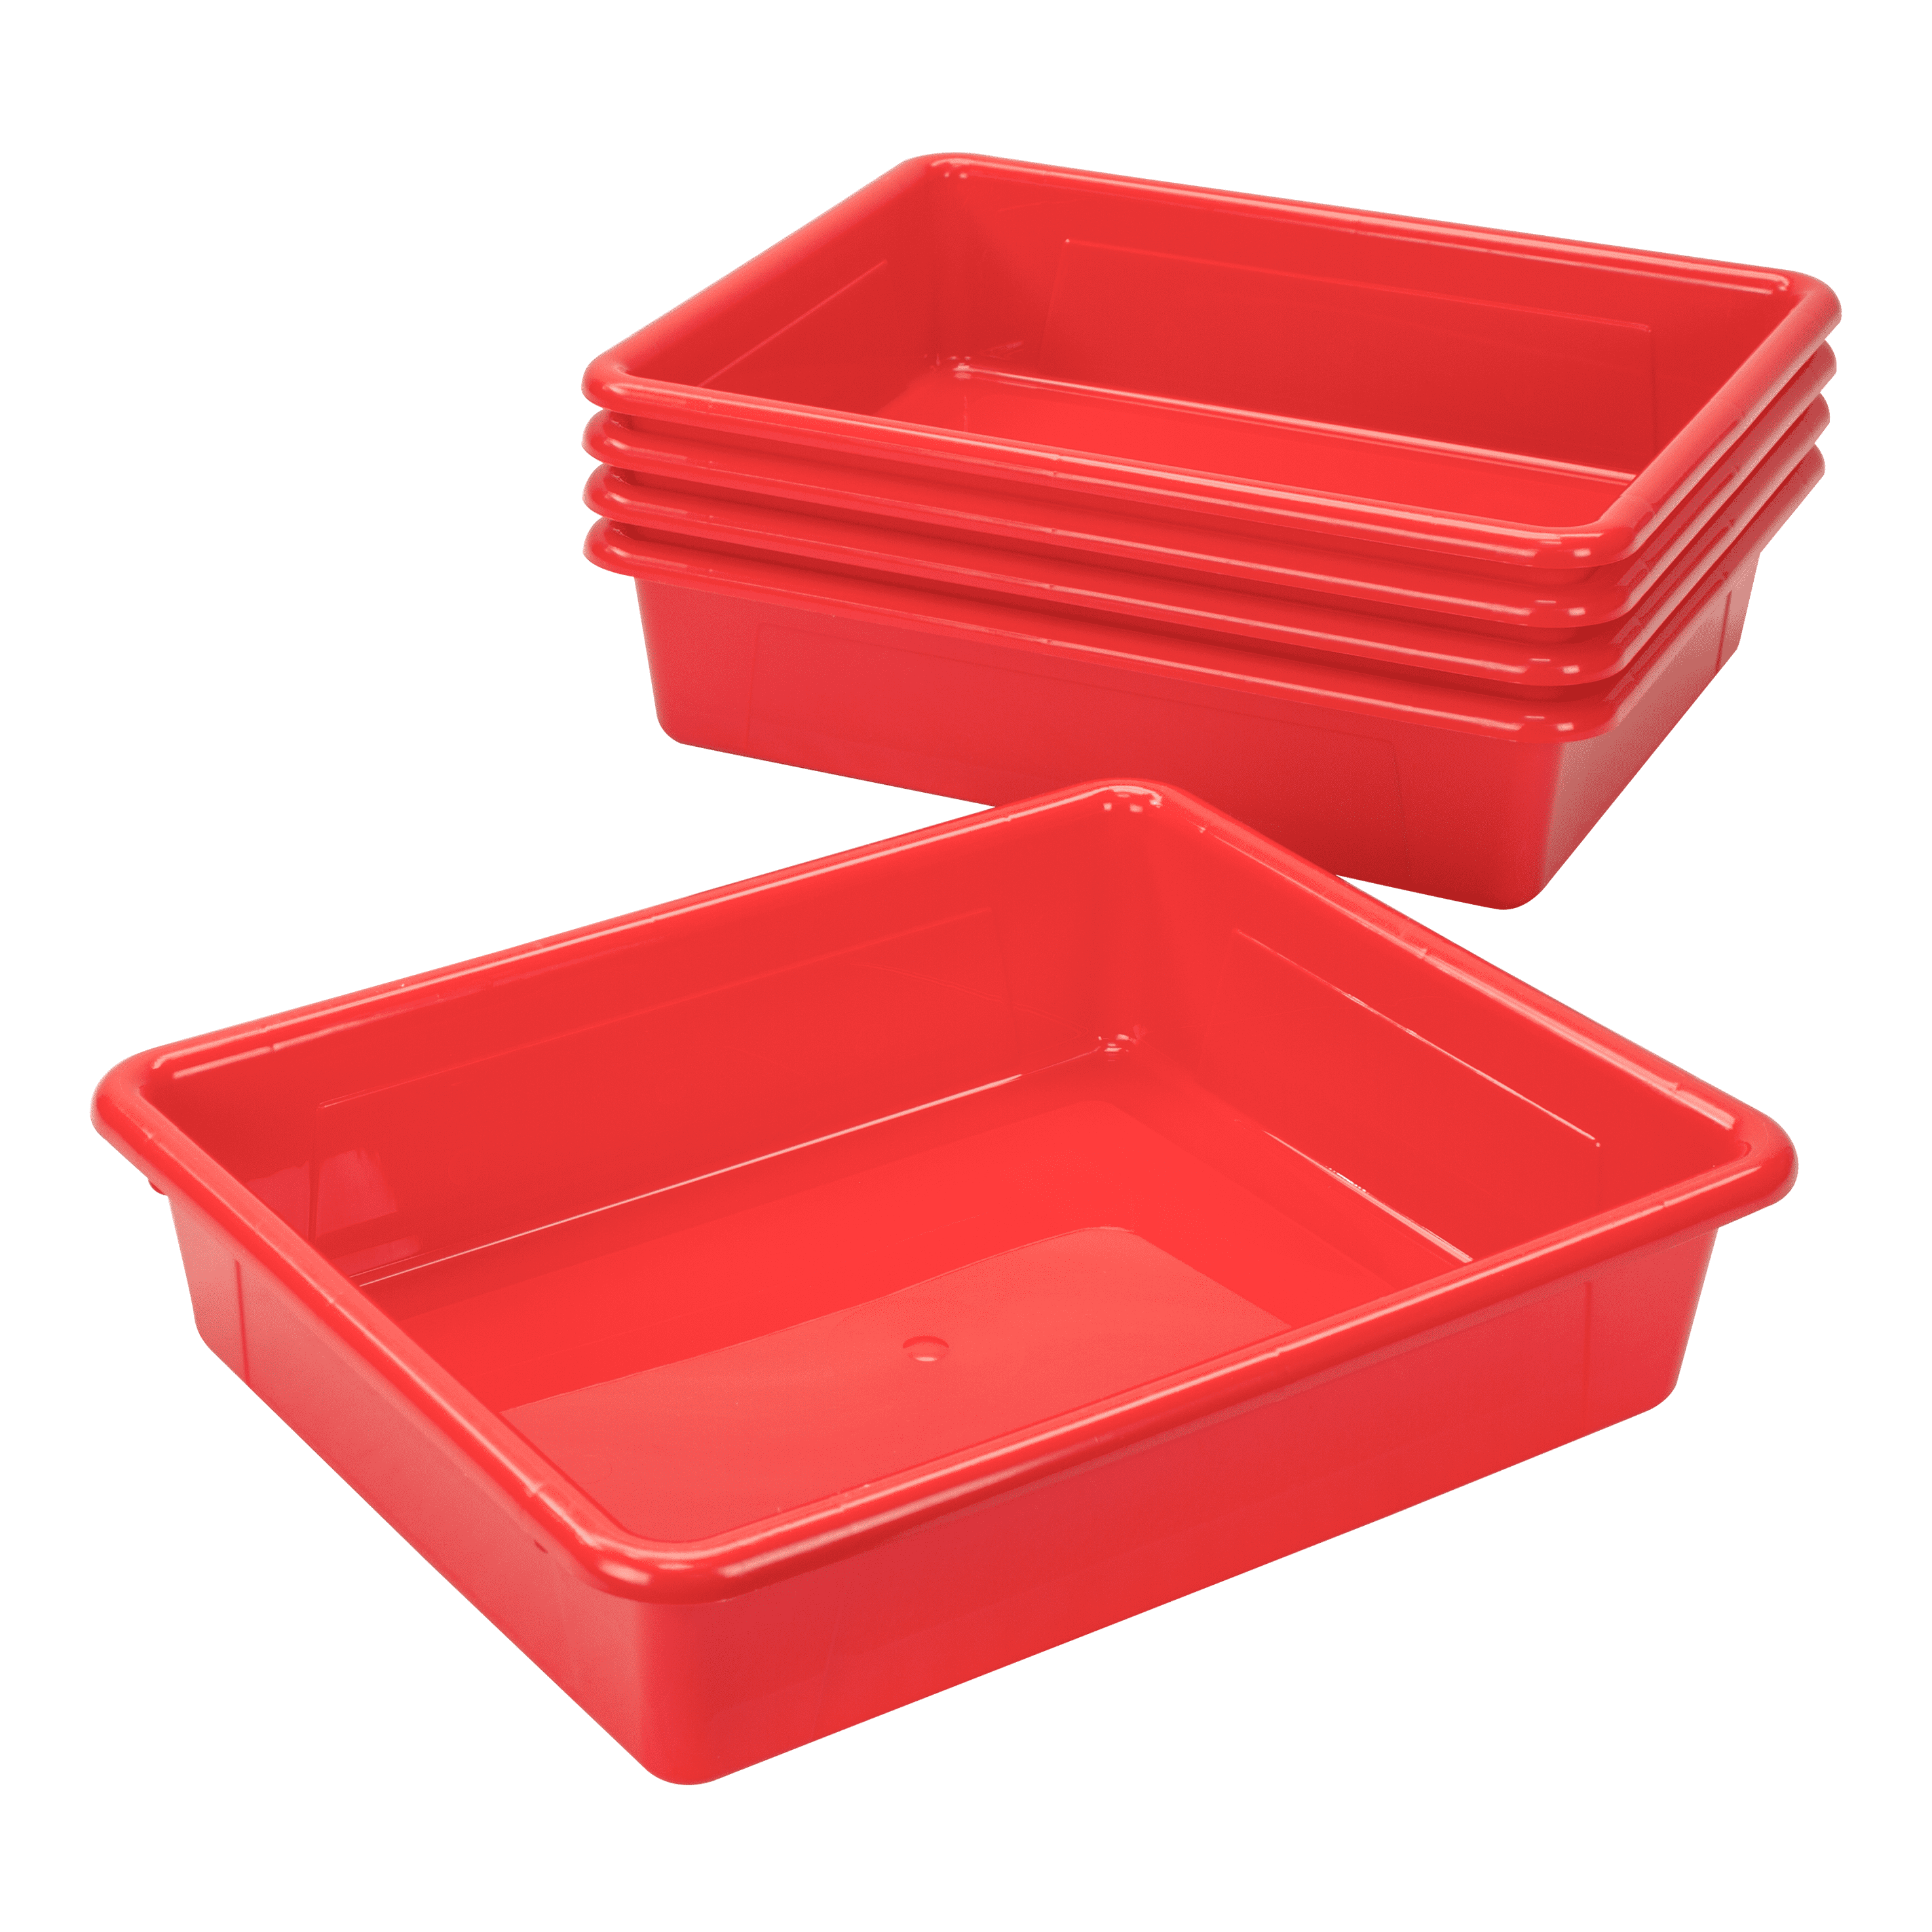 Kitchen Nursery Office Early Excellence A4 Plastic Storage Pack of x5 Quantity Red Trays Plastic PP Perfect Paper Stationary Storage System for School Workshop Garage or Home 